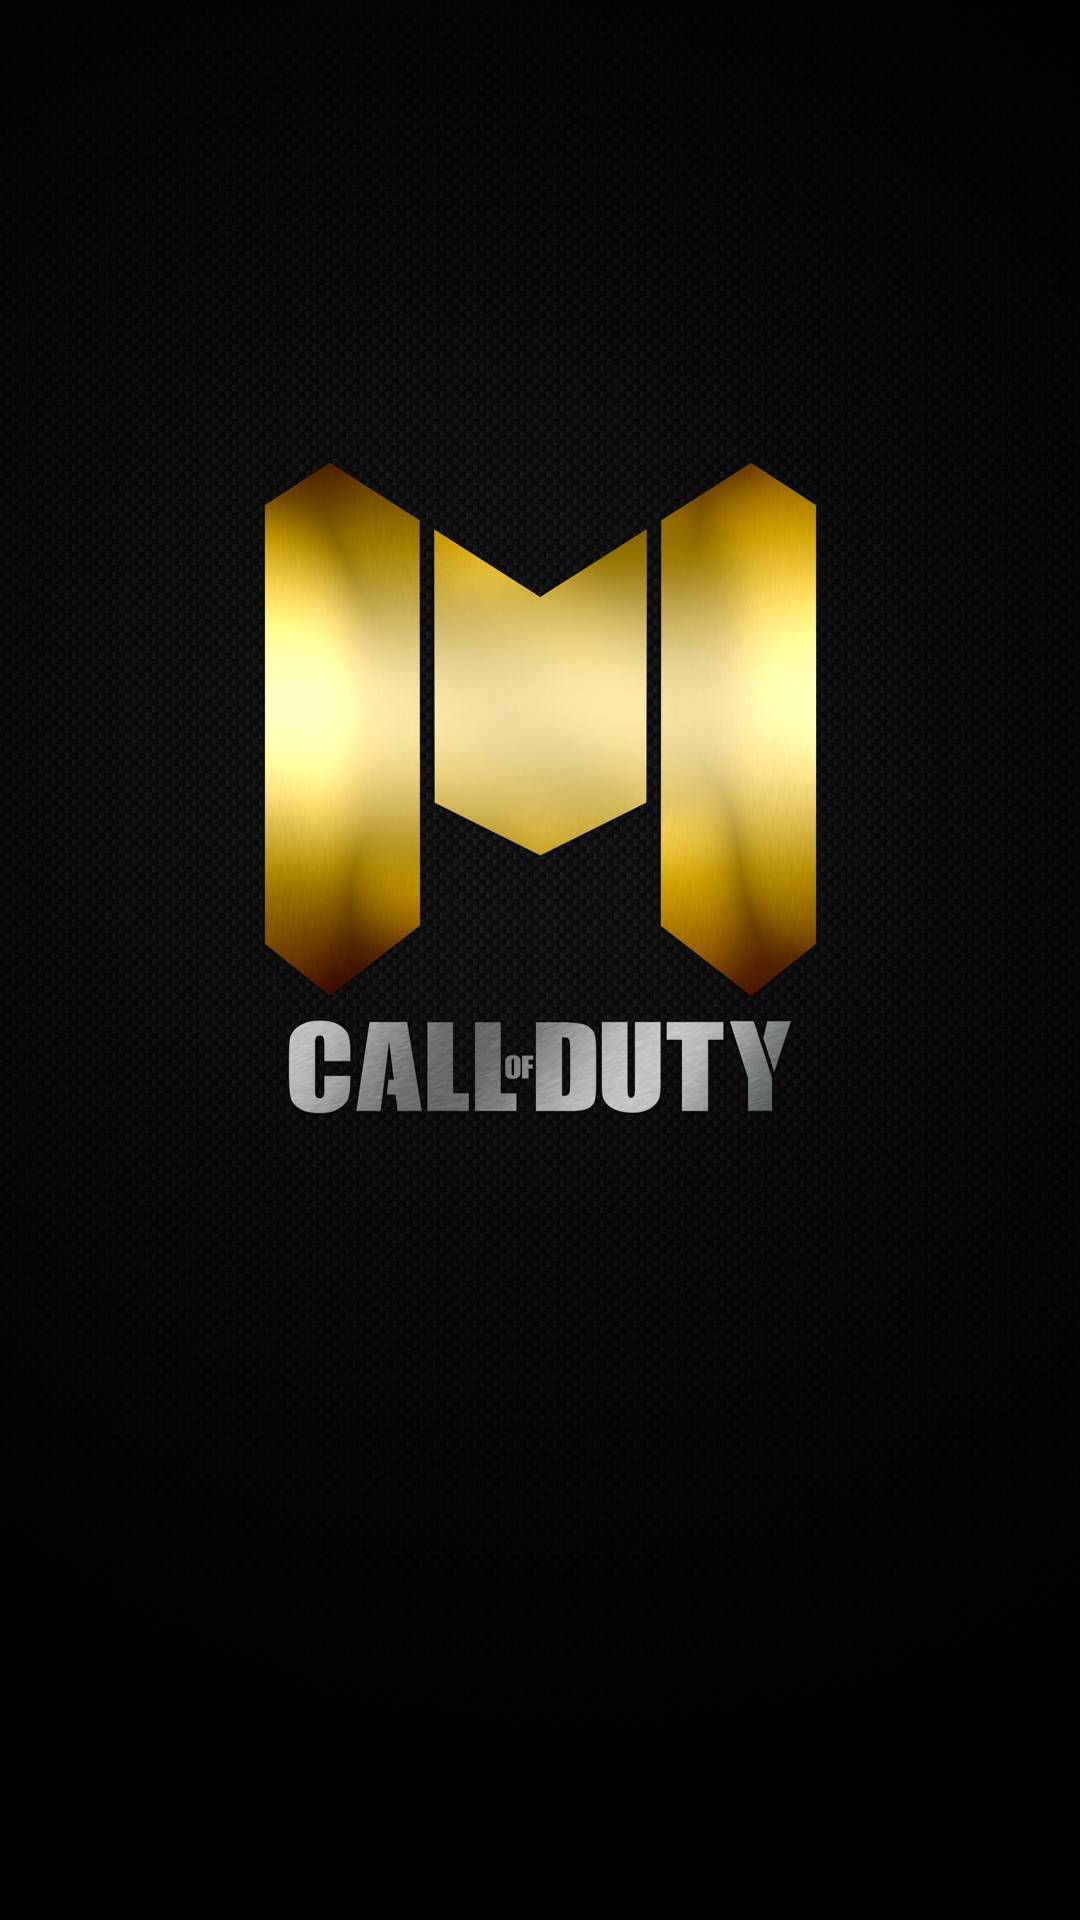 Call Of Duty Mobile Wallpaper Mobile. Call of duty